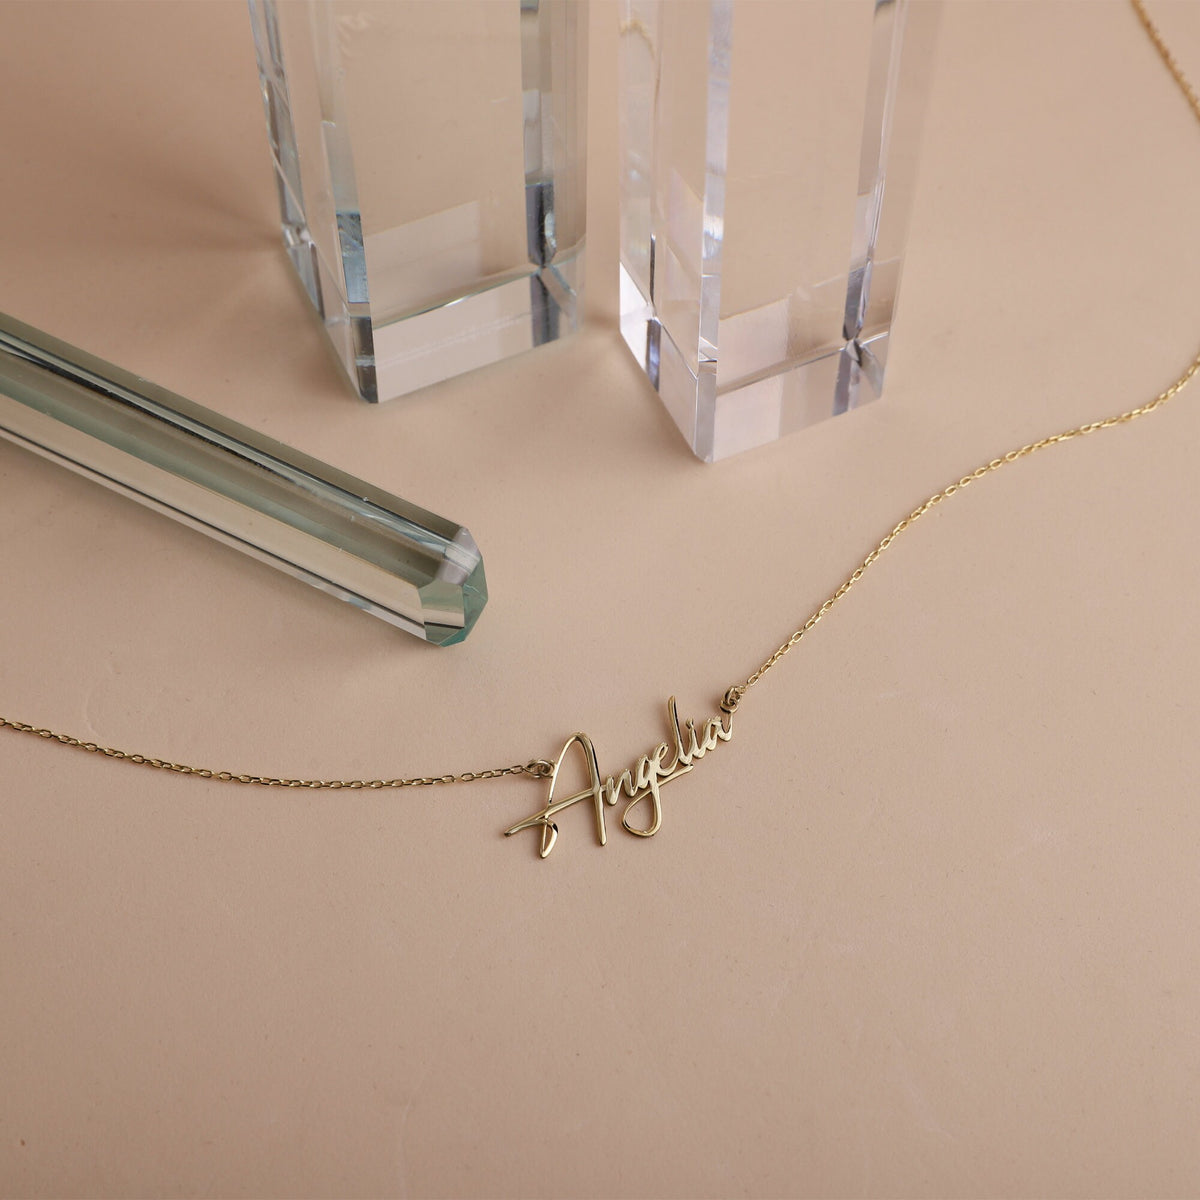 Custom Dainty Gold Name Necklace with Birthstone | Personalized Minimalist Name Handmade Jewelry | Dainty Birthday Gifts for Her